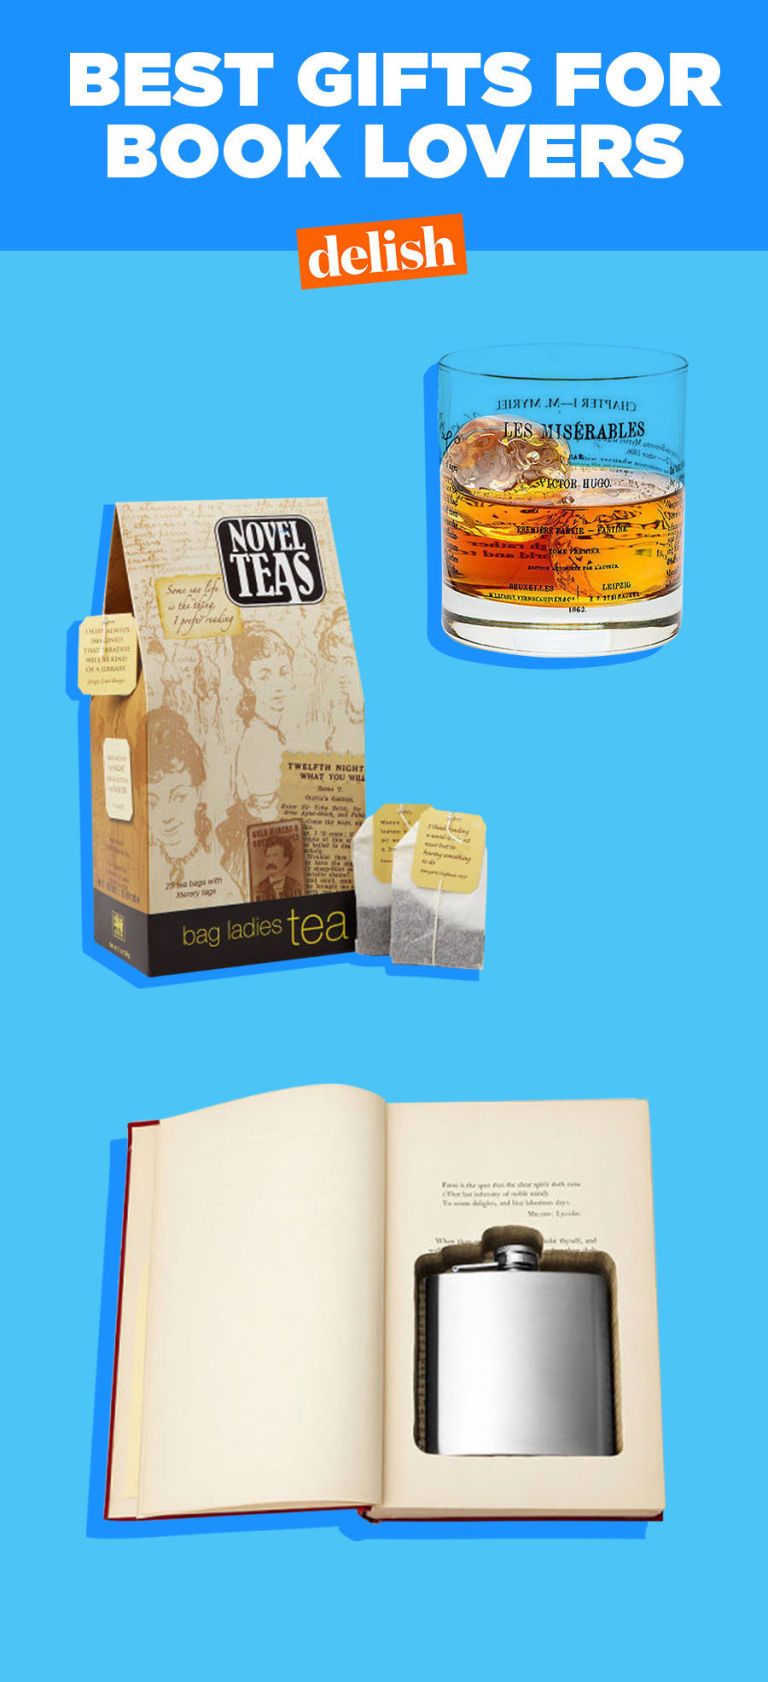 10 Best Gifts For Book Lovers - Unique Gift Ideas For Readers—Delish.com